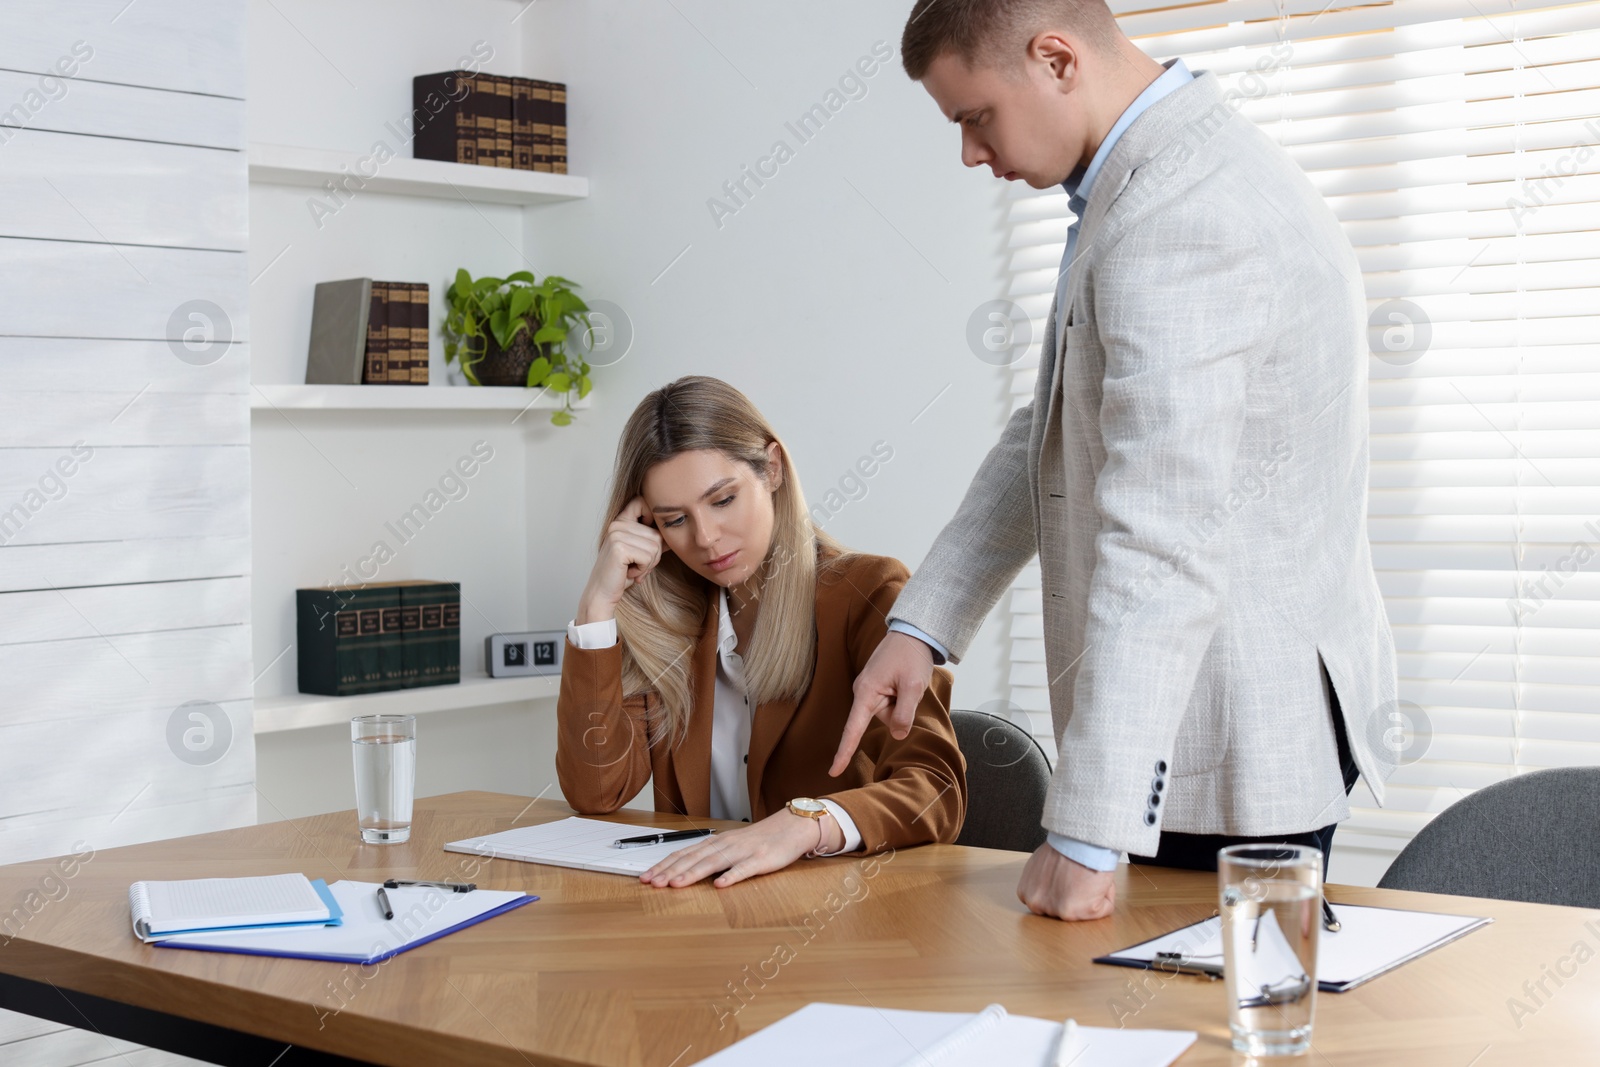 Photo of Businessman pointing on wrist watch while scolding employee for being late in office